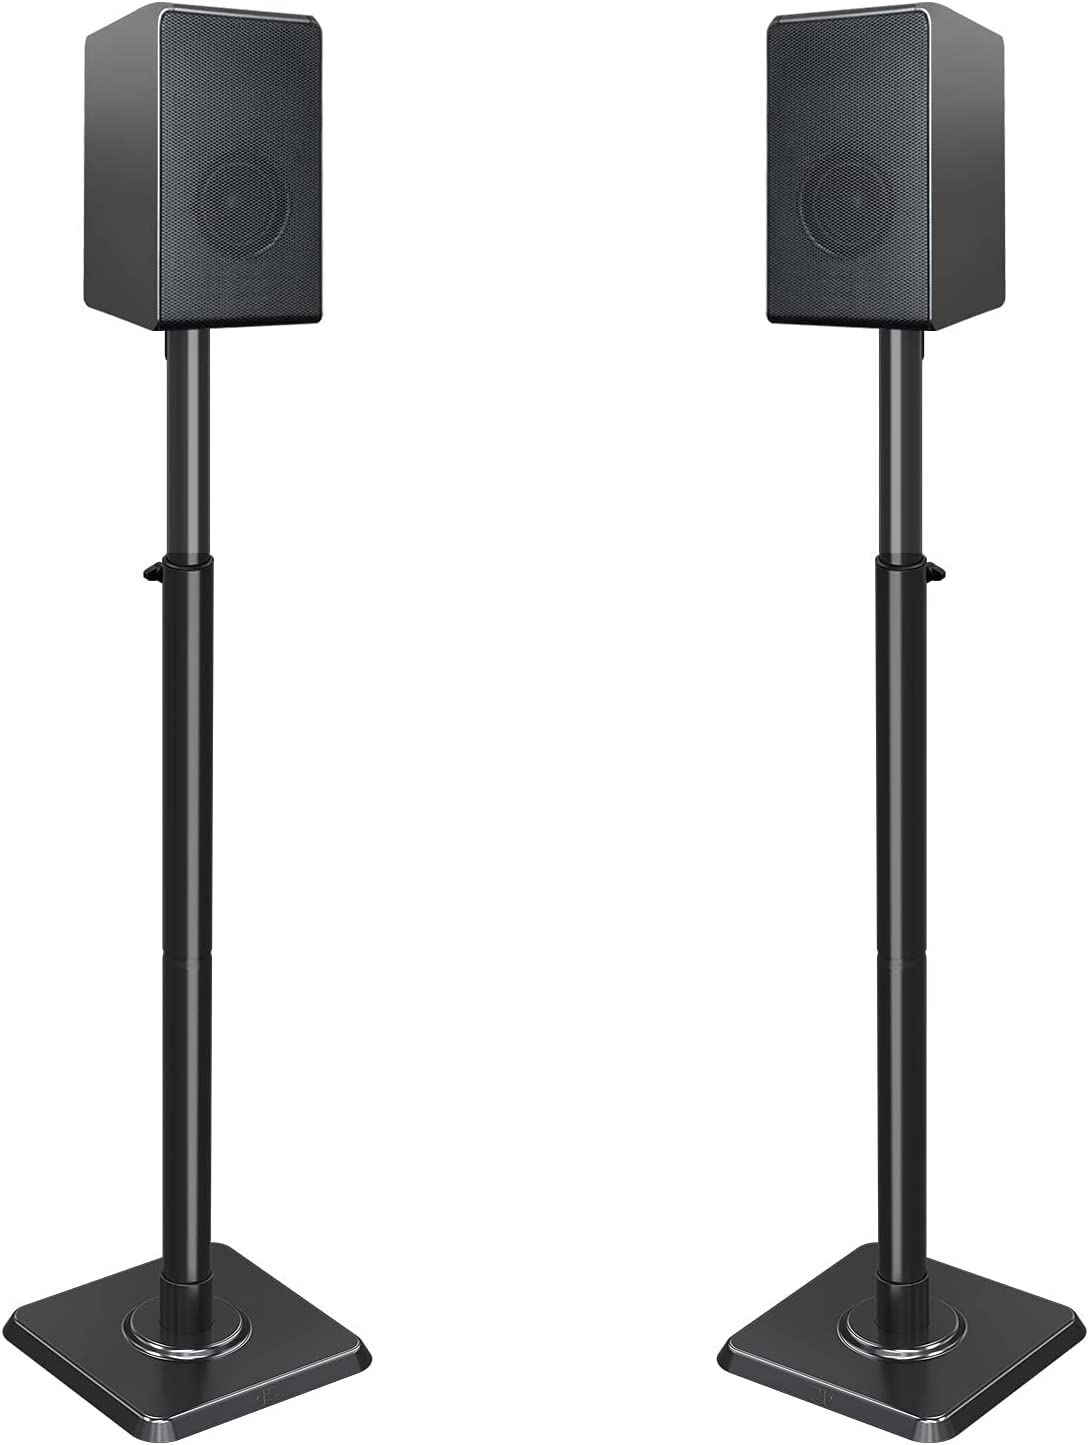 photo of Mounting Dream Speaker Stands Height Adjustable for Satellite & Small Bookshelf Speakers, Set of 2 Floor Stand Mount for Bose Polk JBL Sony Yamaha and Others - 11LBS Capacity MD5402